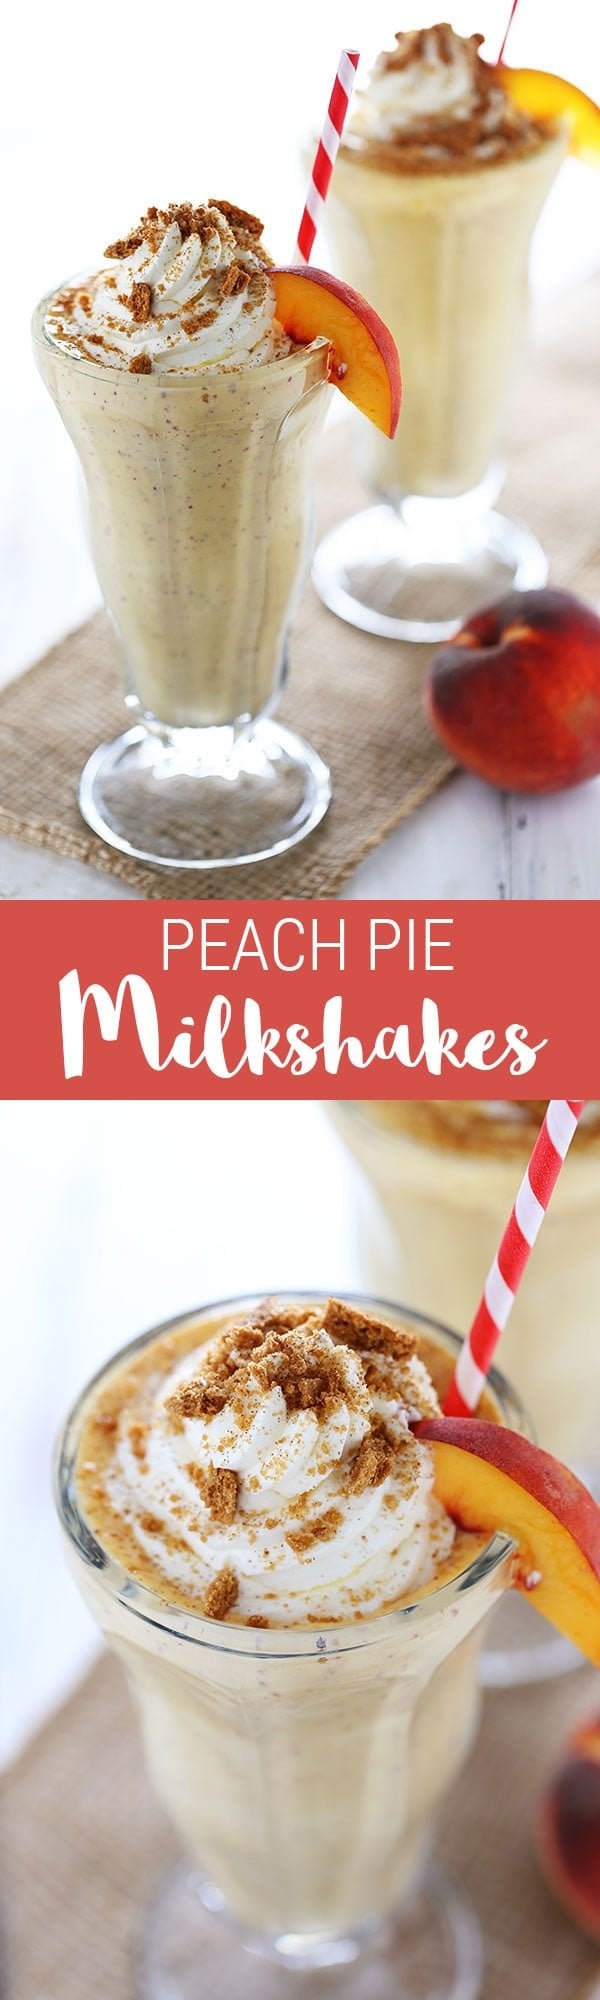 Best summer shake EVER! Peach Pie Milkshakes are perfectly frosty, fresh, and flavorful making them the perfect summer dessert recipe.